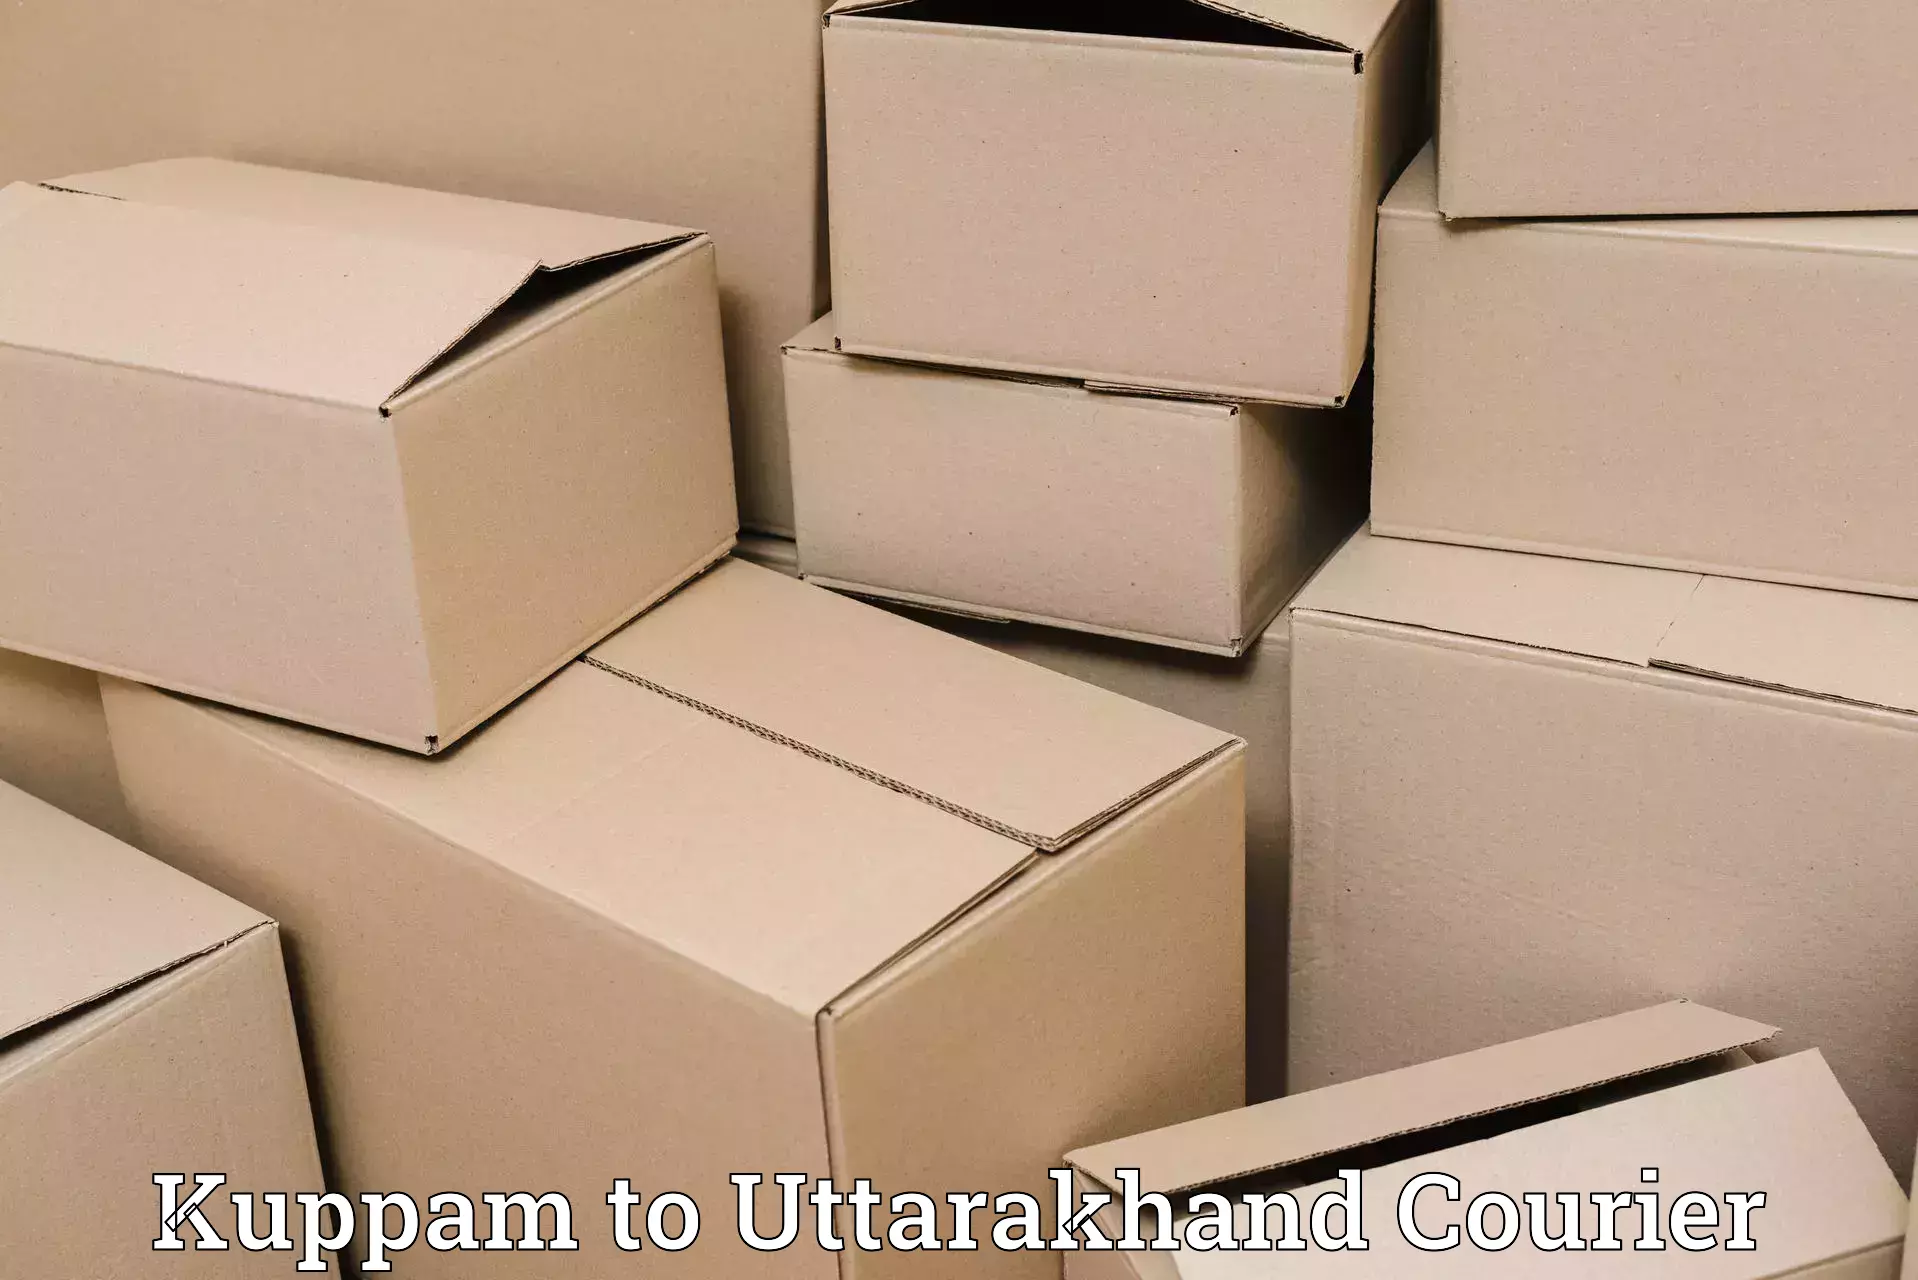 Business delivery service Kuppam to Rudrapur